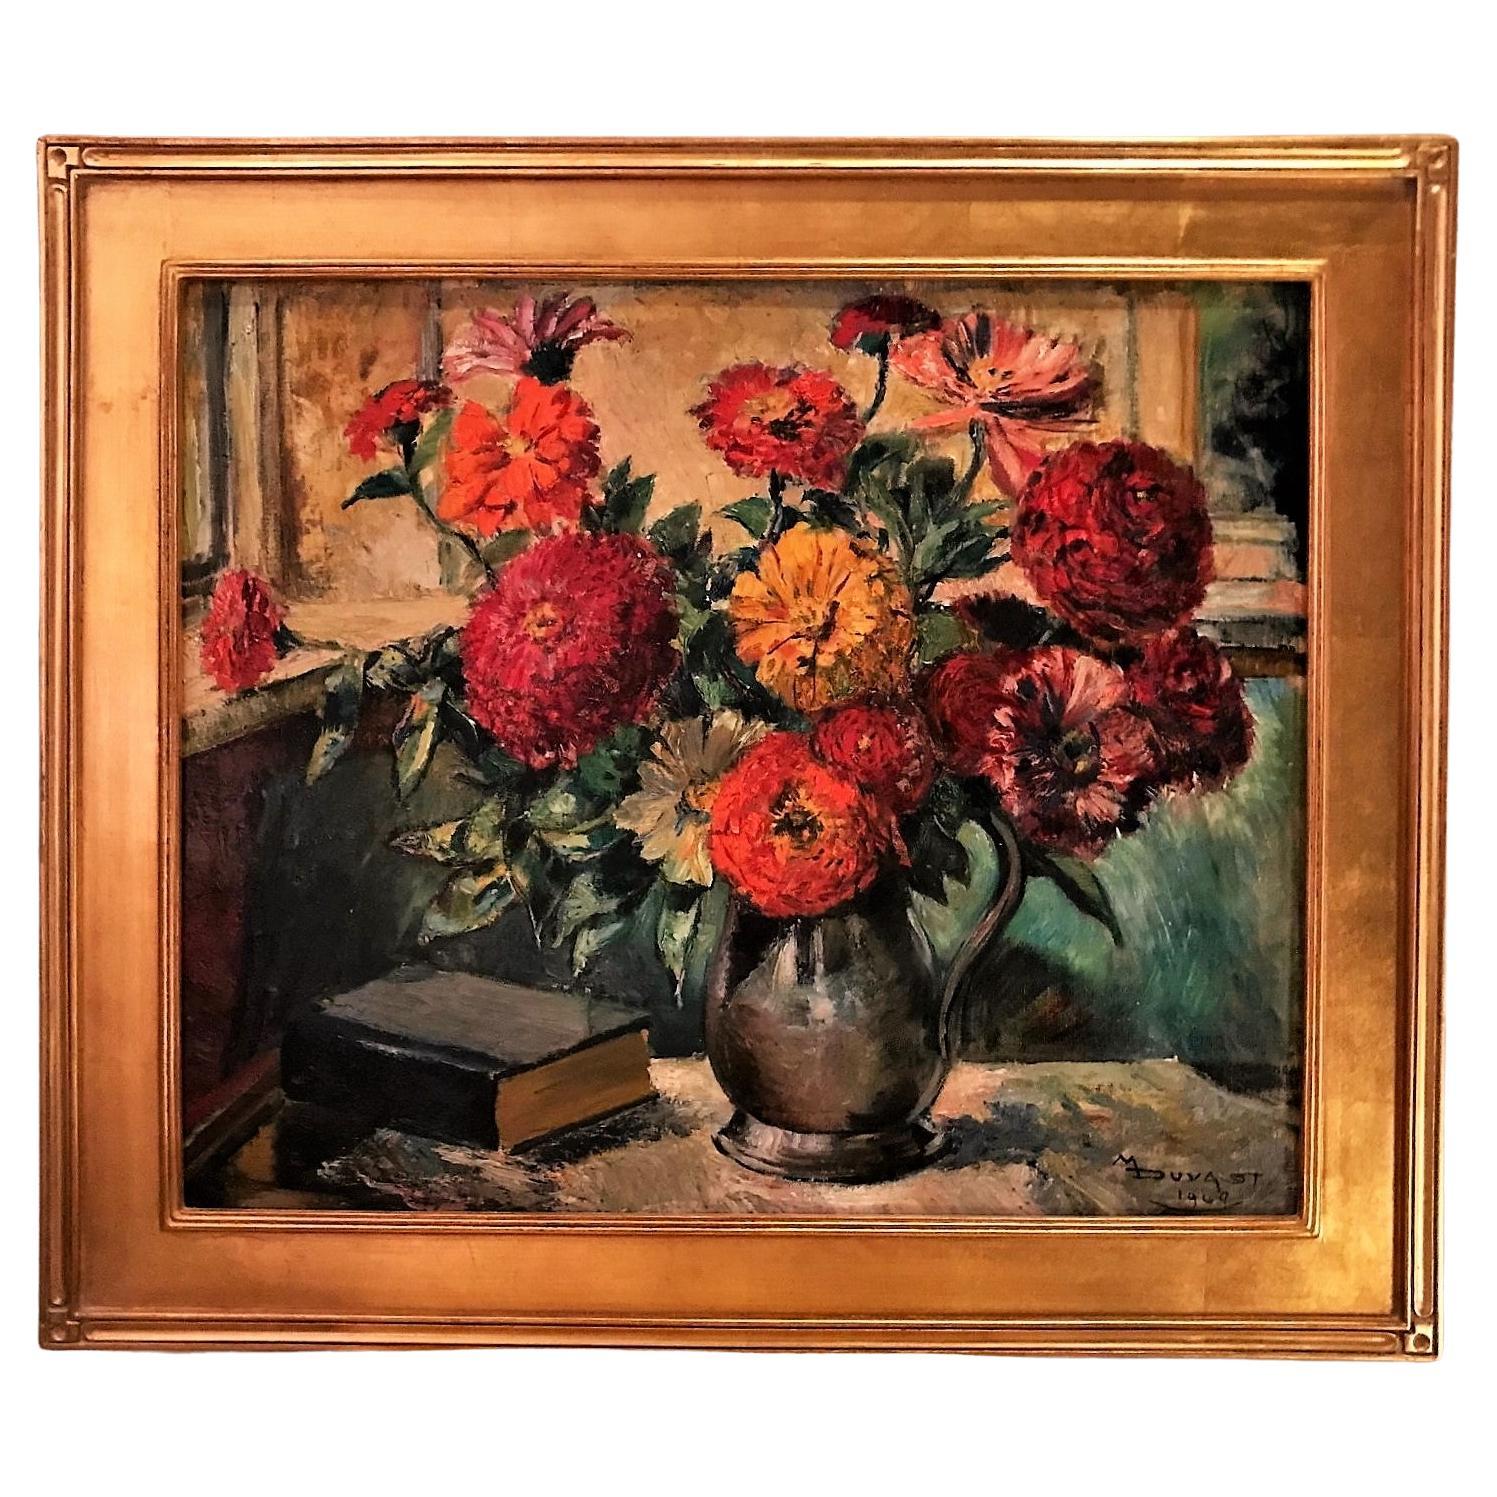 Oil on Board, "Zinnias in a Pewter Pitcher",  Maurice Duvalet (1893-1971), 1949 For Sale